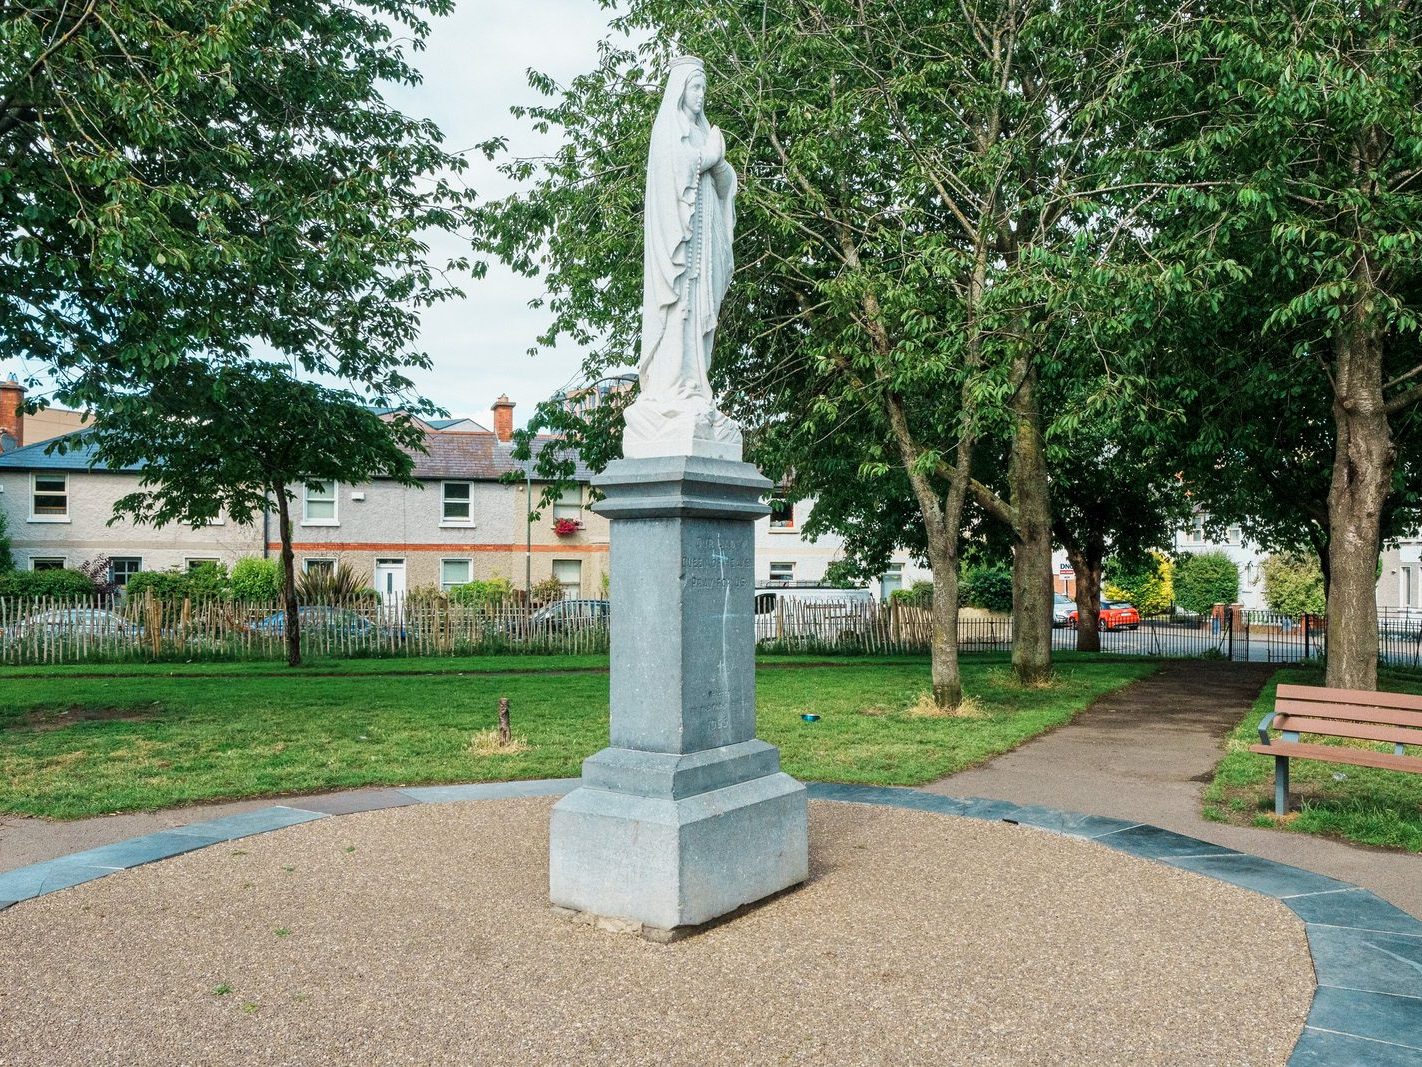 MARIAN STATUE ERECTED IN 1955 RATHER THAN 1955 [OSCAR SQUARE PARK] 002